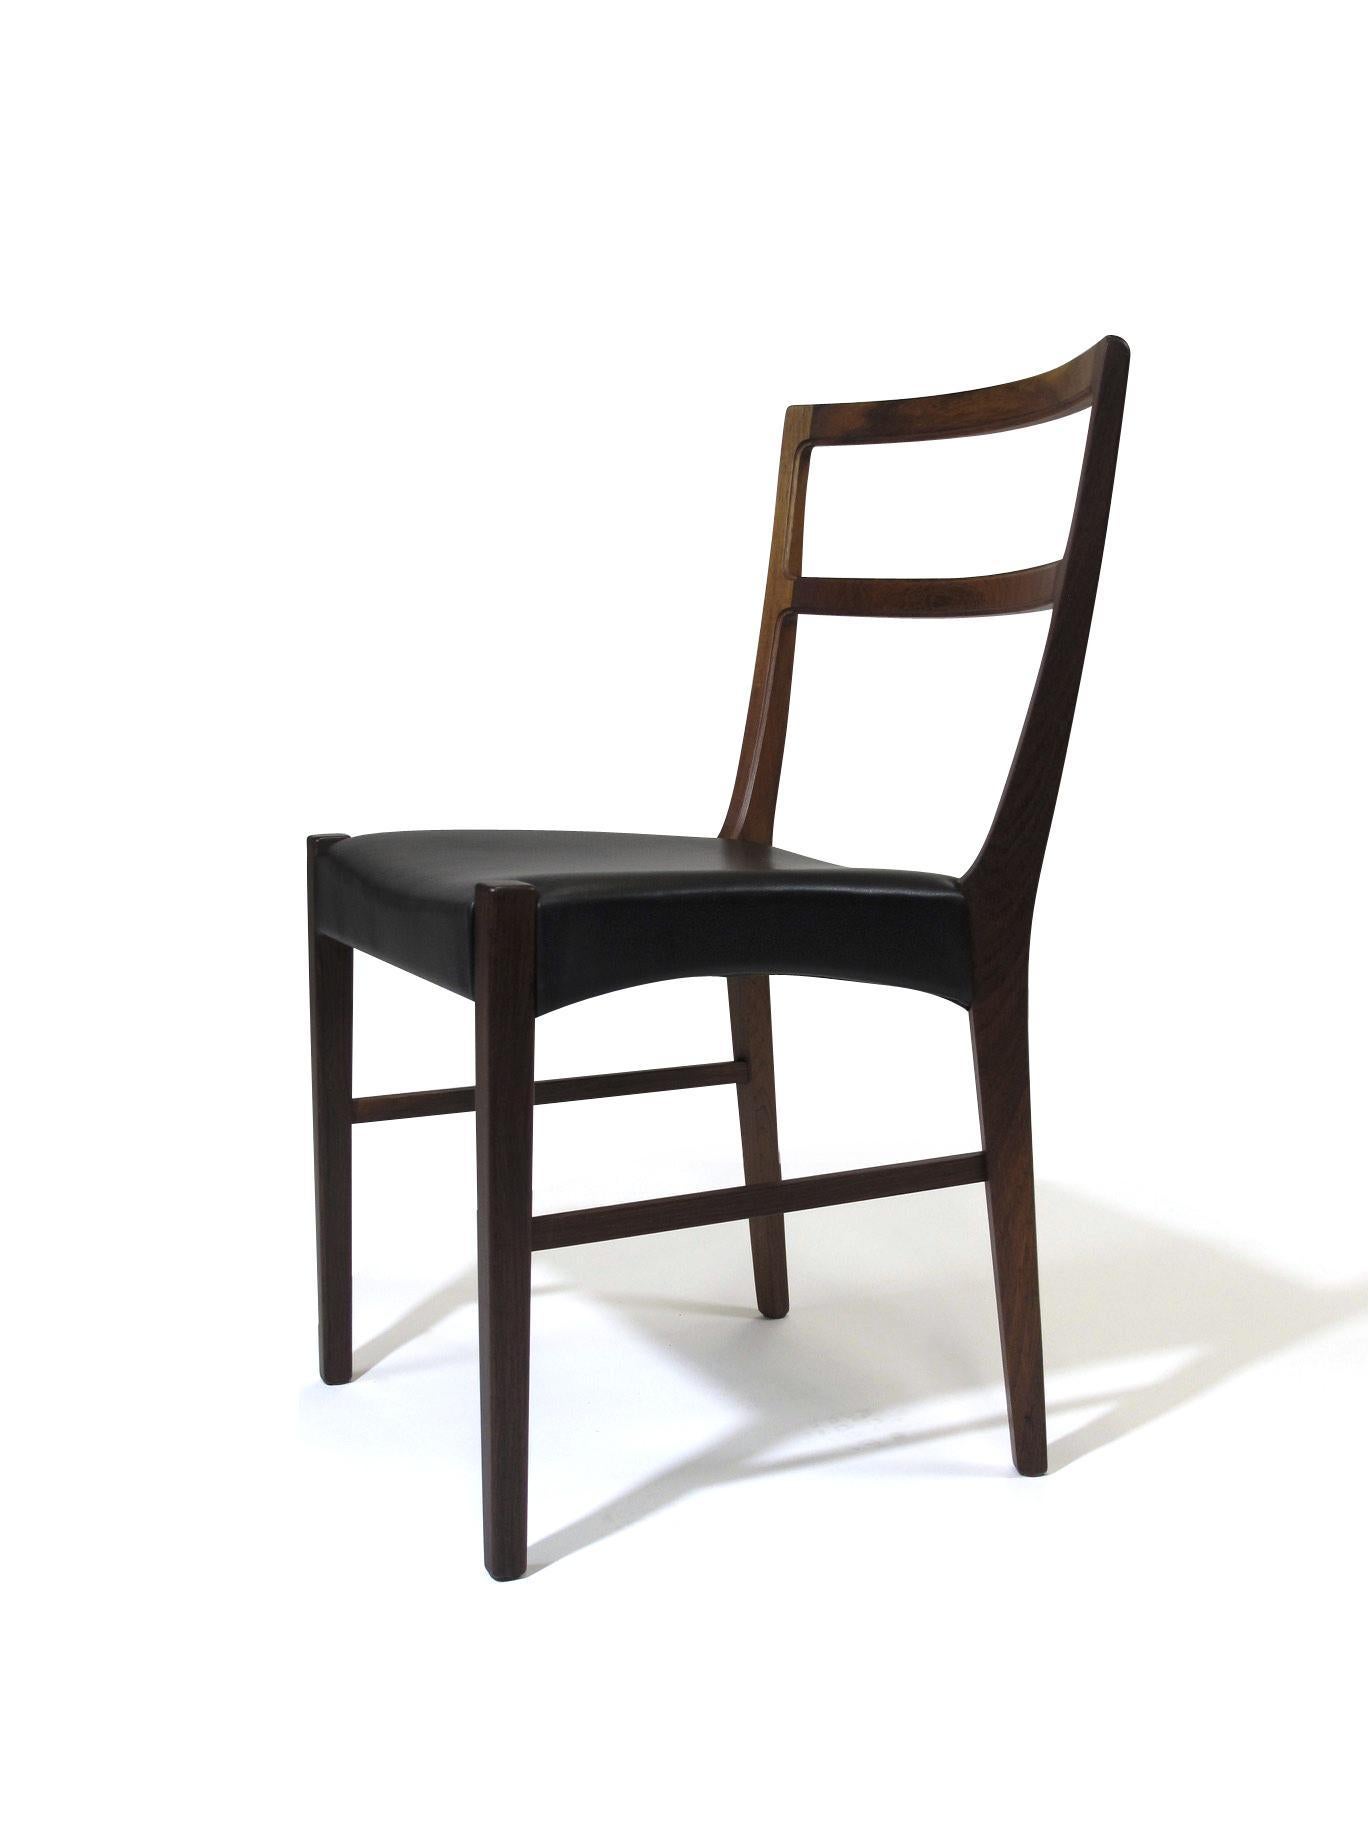 Oiled Johannes Andersen for Bernhard Pedersen & Sons Rosewood Dining Chairs - Set of 8